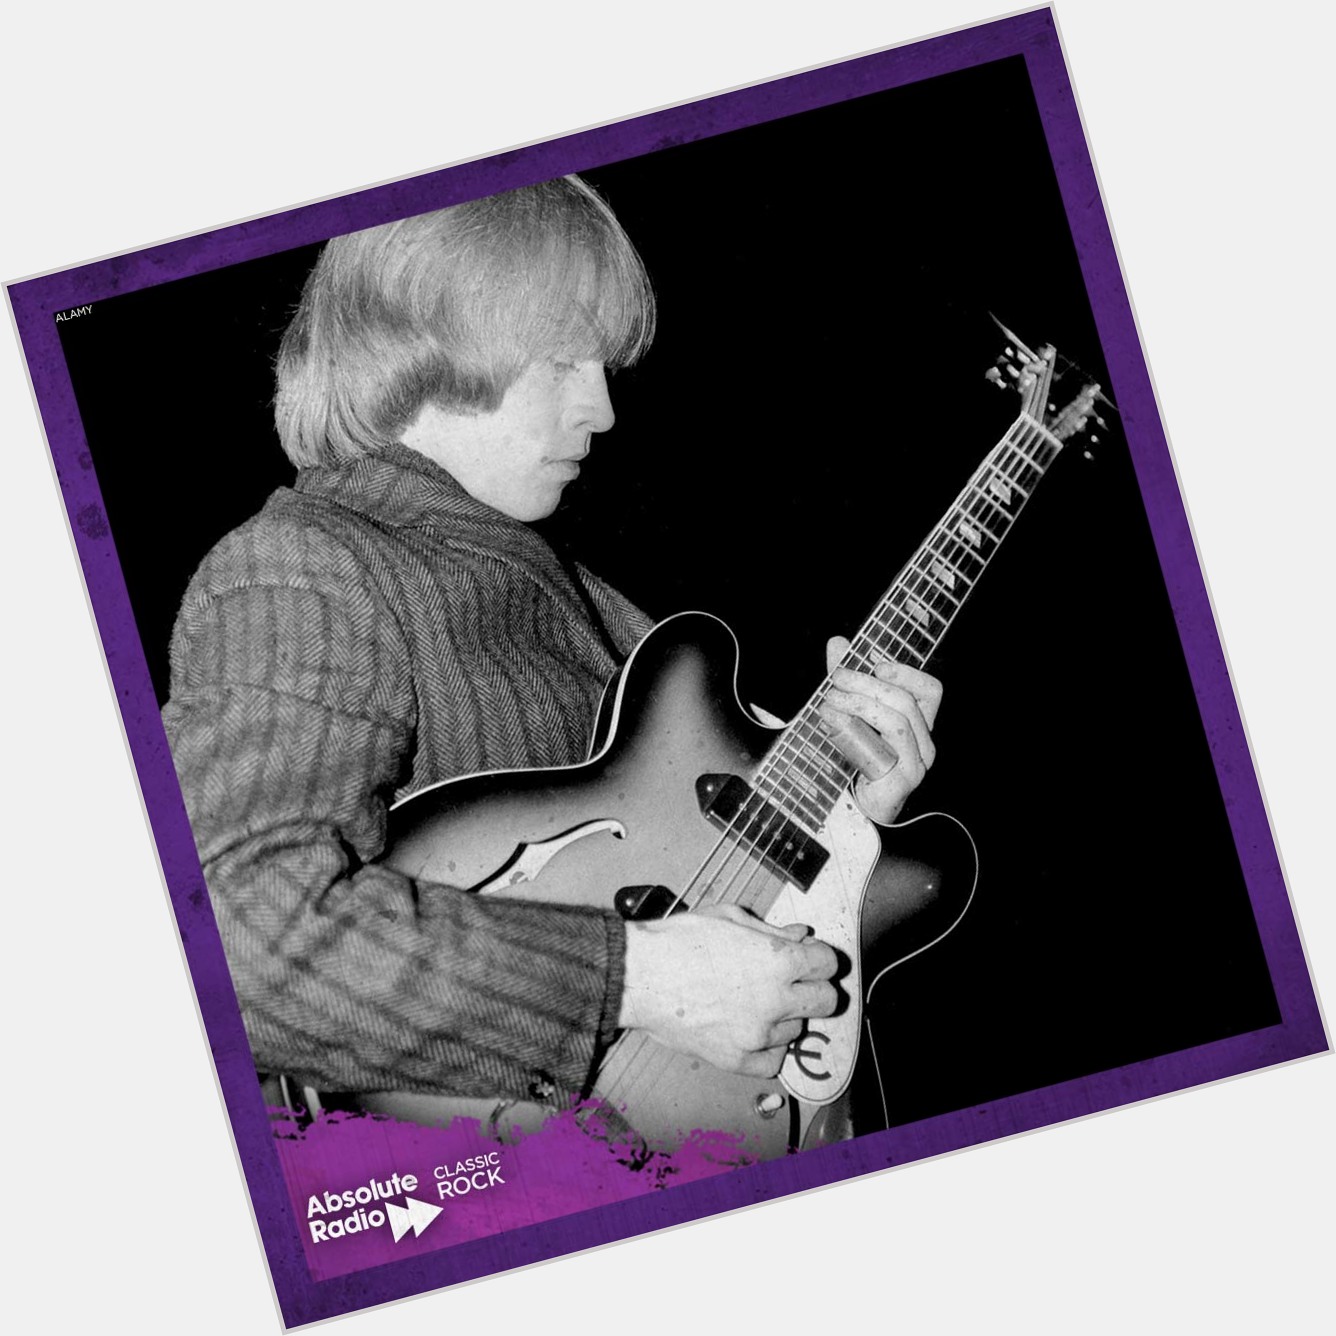 Happy birthday to the late Rolling Stones founder, Brian Jones. 